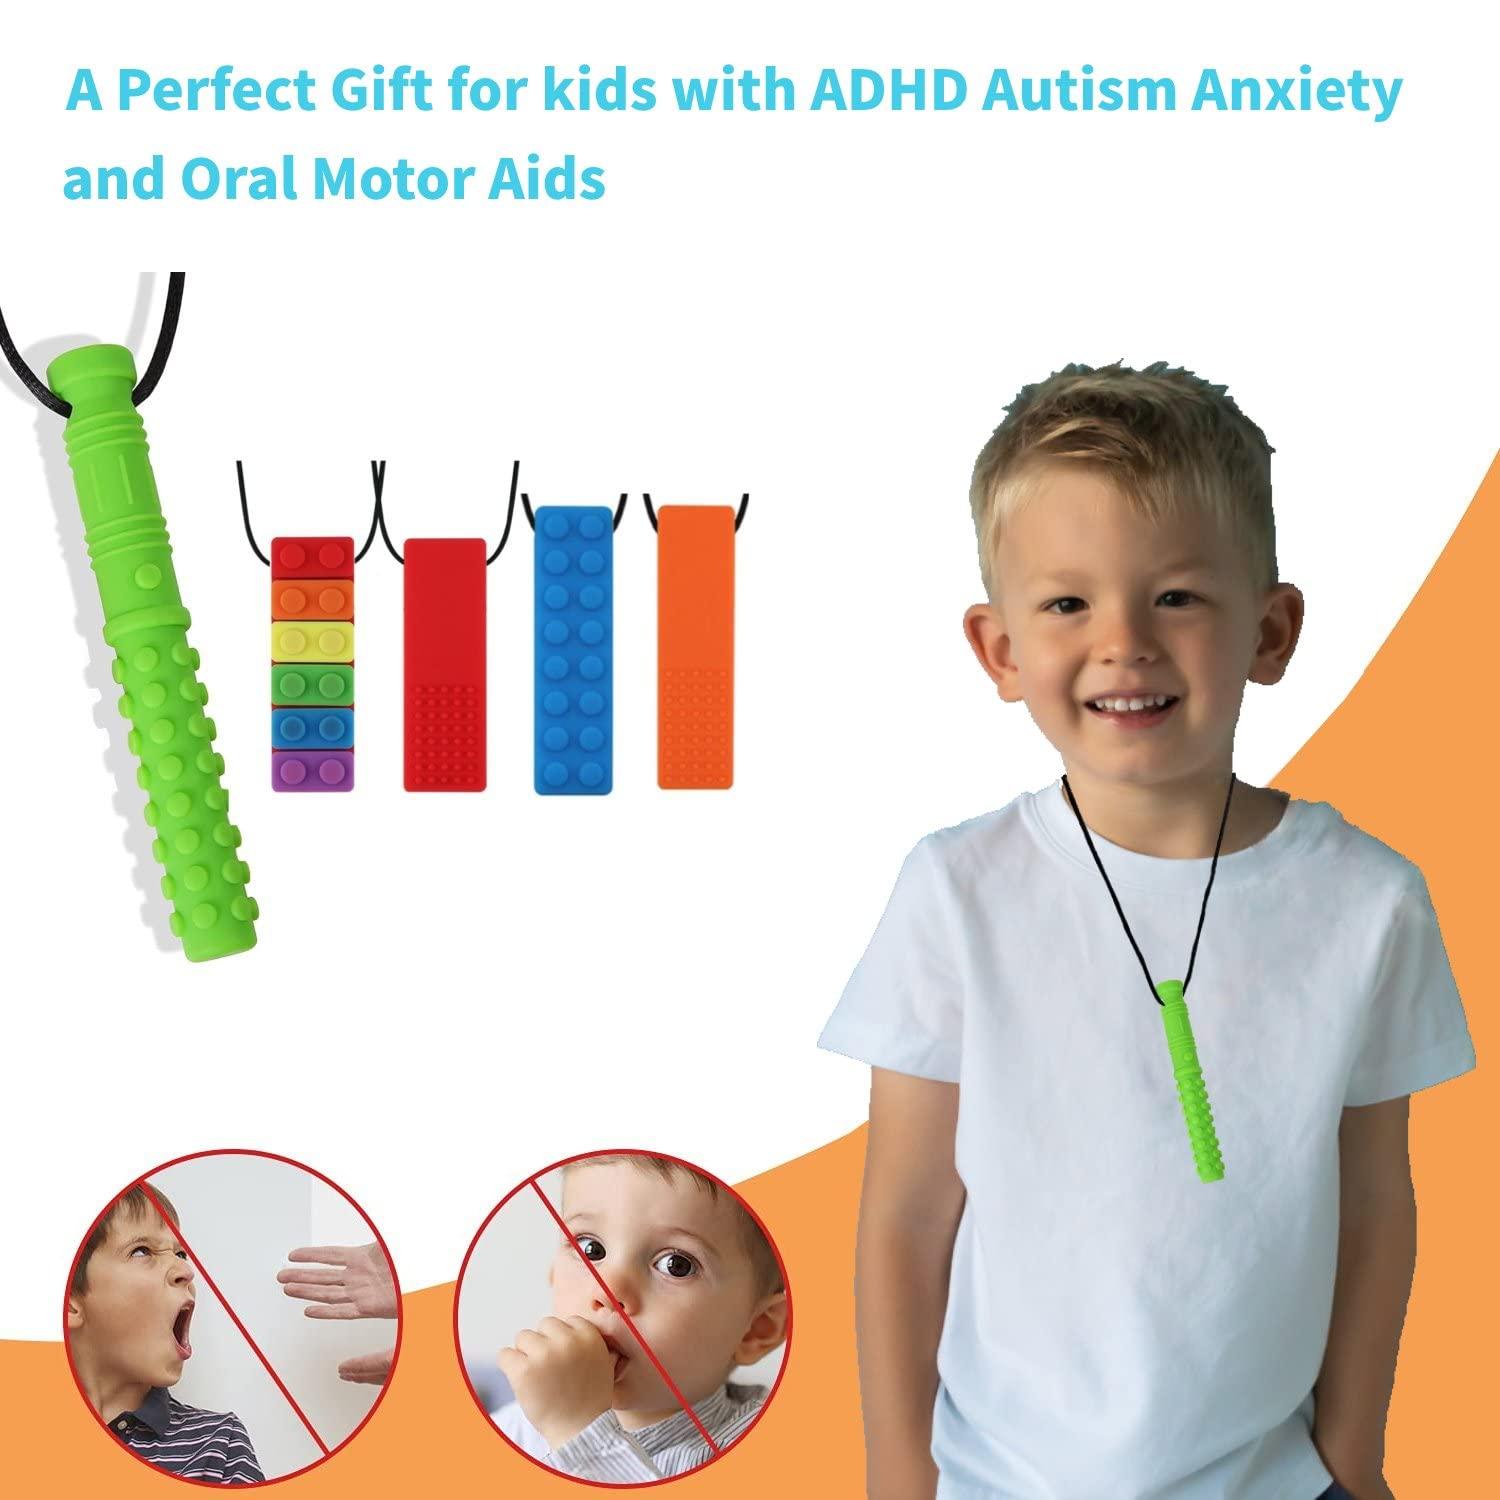 Chew Necklaces for Sensory Kids, Sensory Chewy Toys for Boys with Autism,  ADHD, SPD, Chewing, Silicone Chewing Necklace Reduce Adult Anxiety  Fidgeting : Amazon.sg: Health, Household and Personal Care